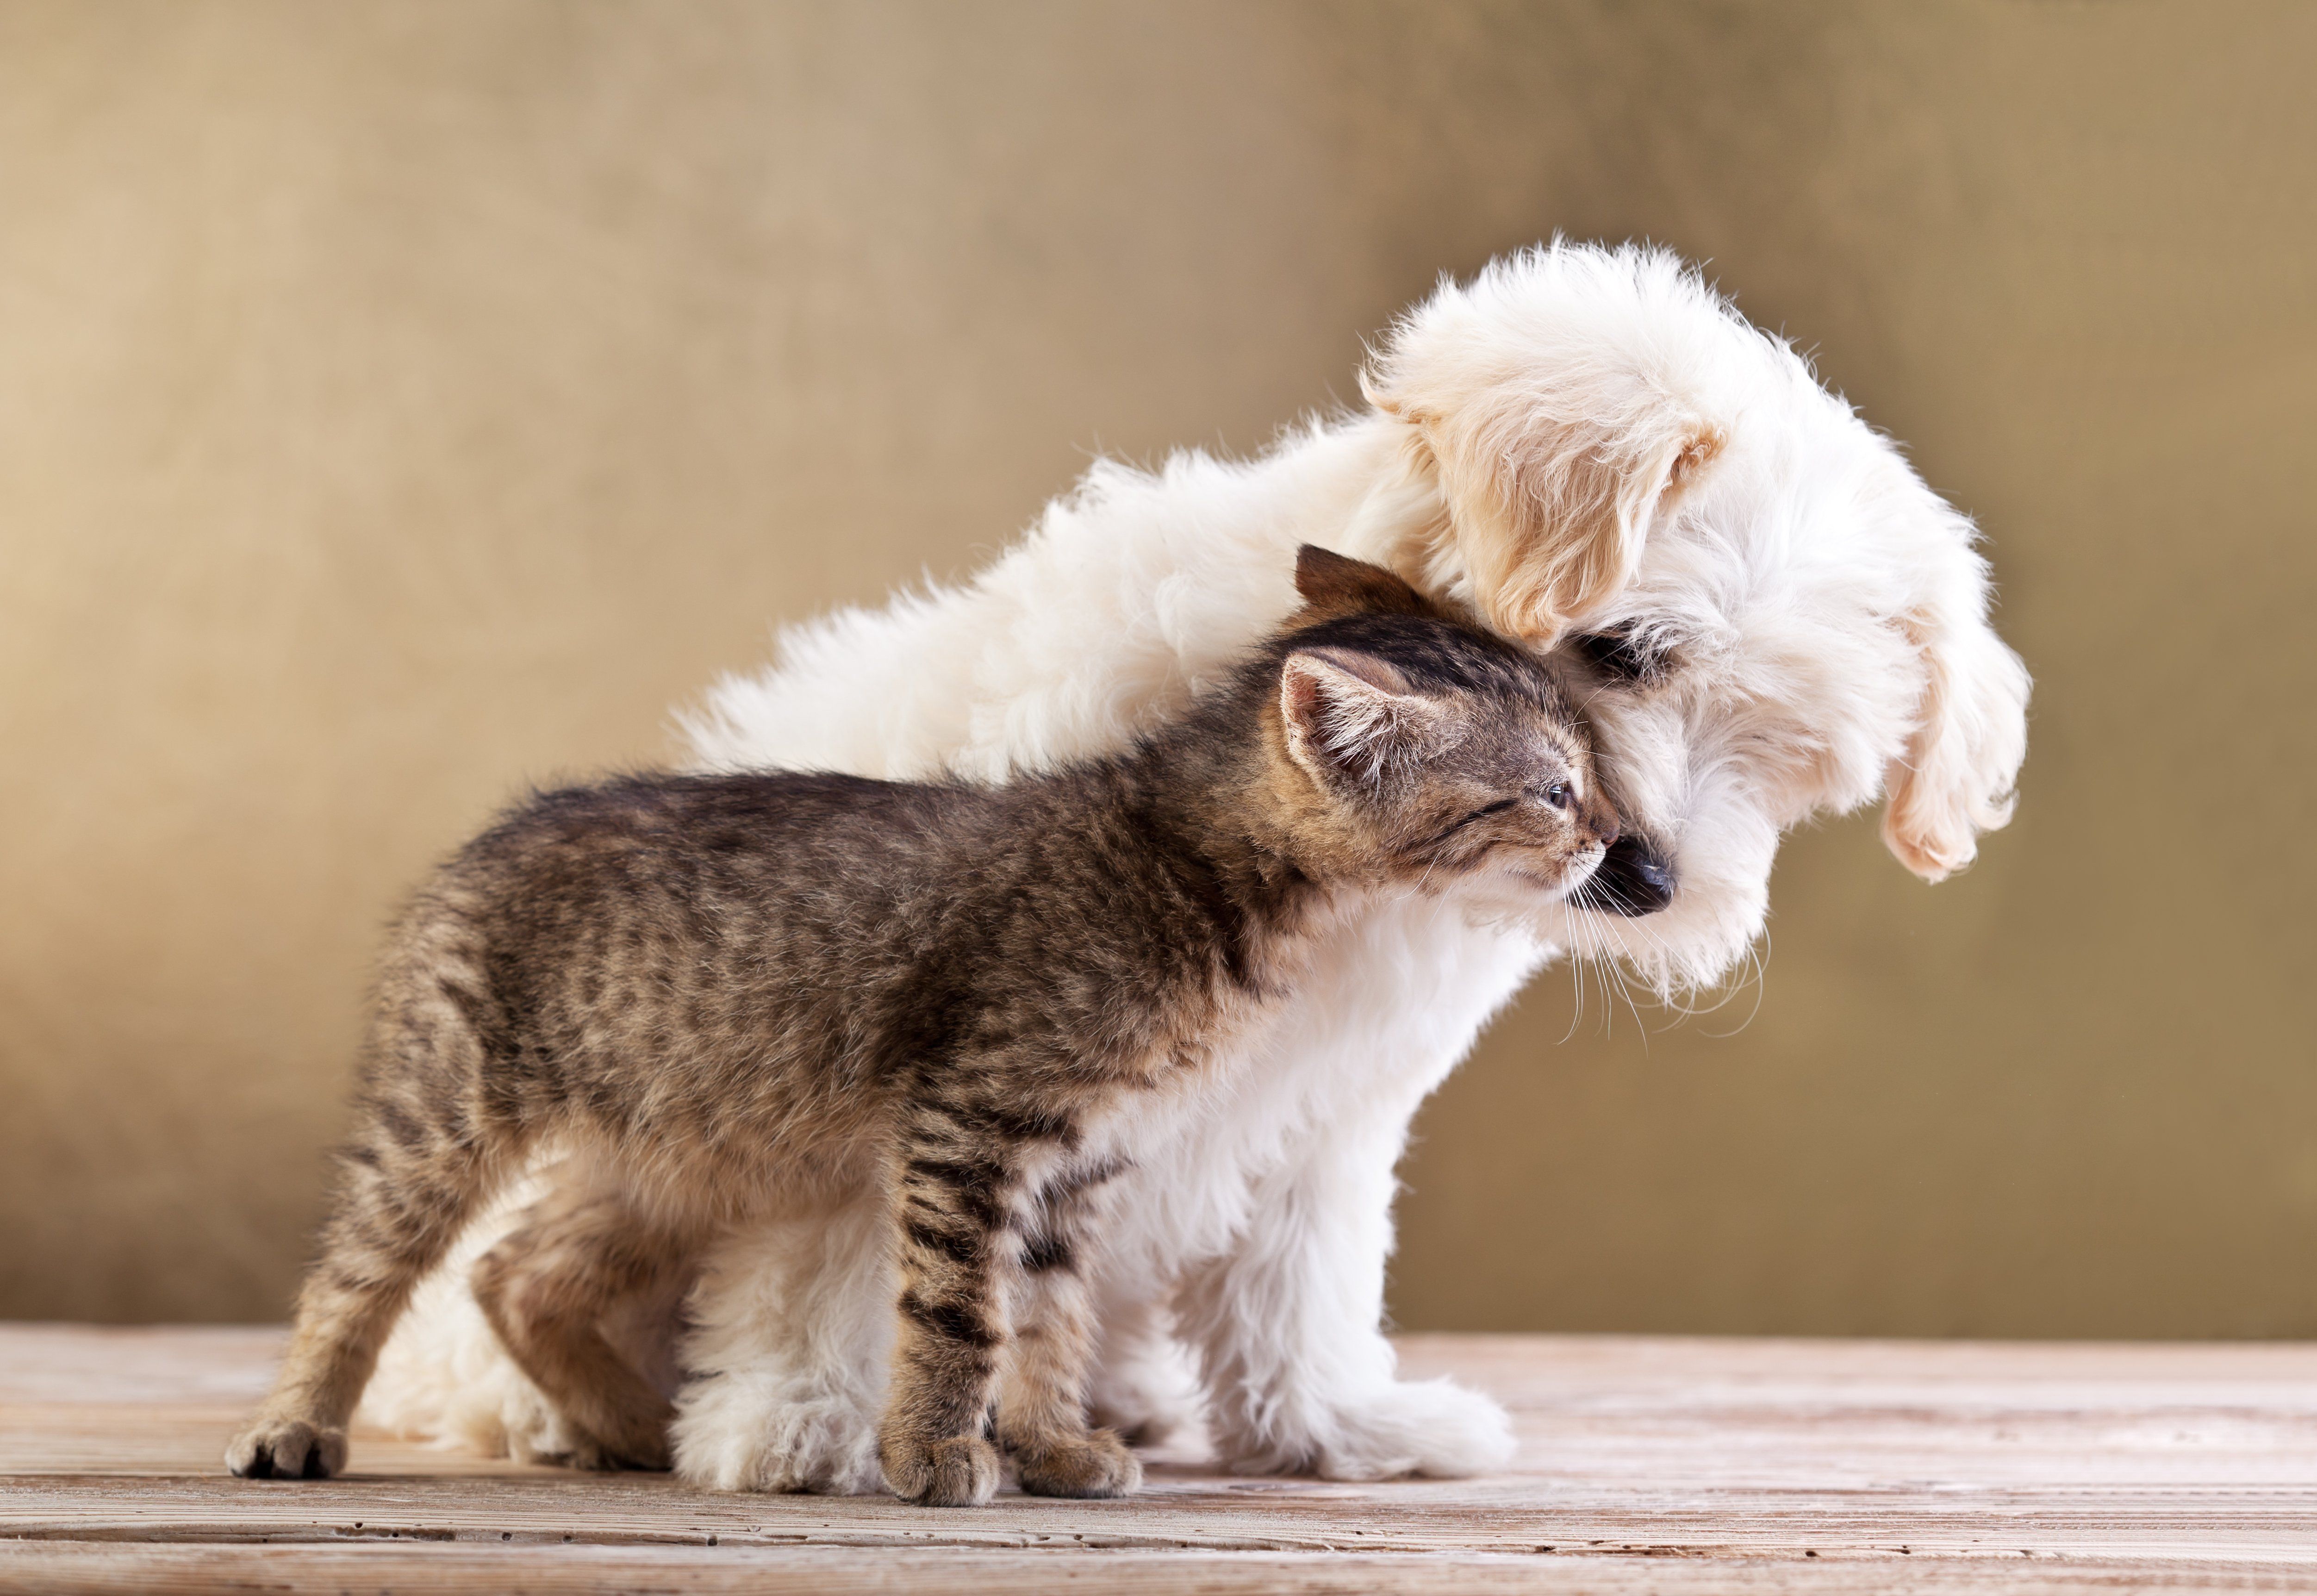 Cats Dogs Two Animals puppy kitten wallpaper 5006x3448 348802